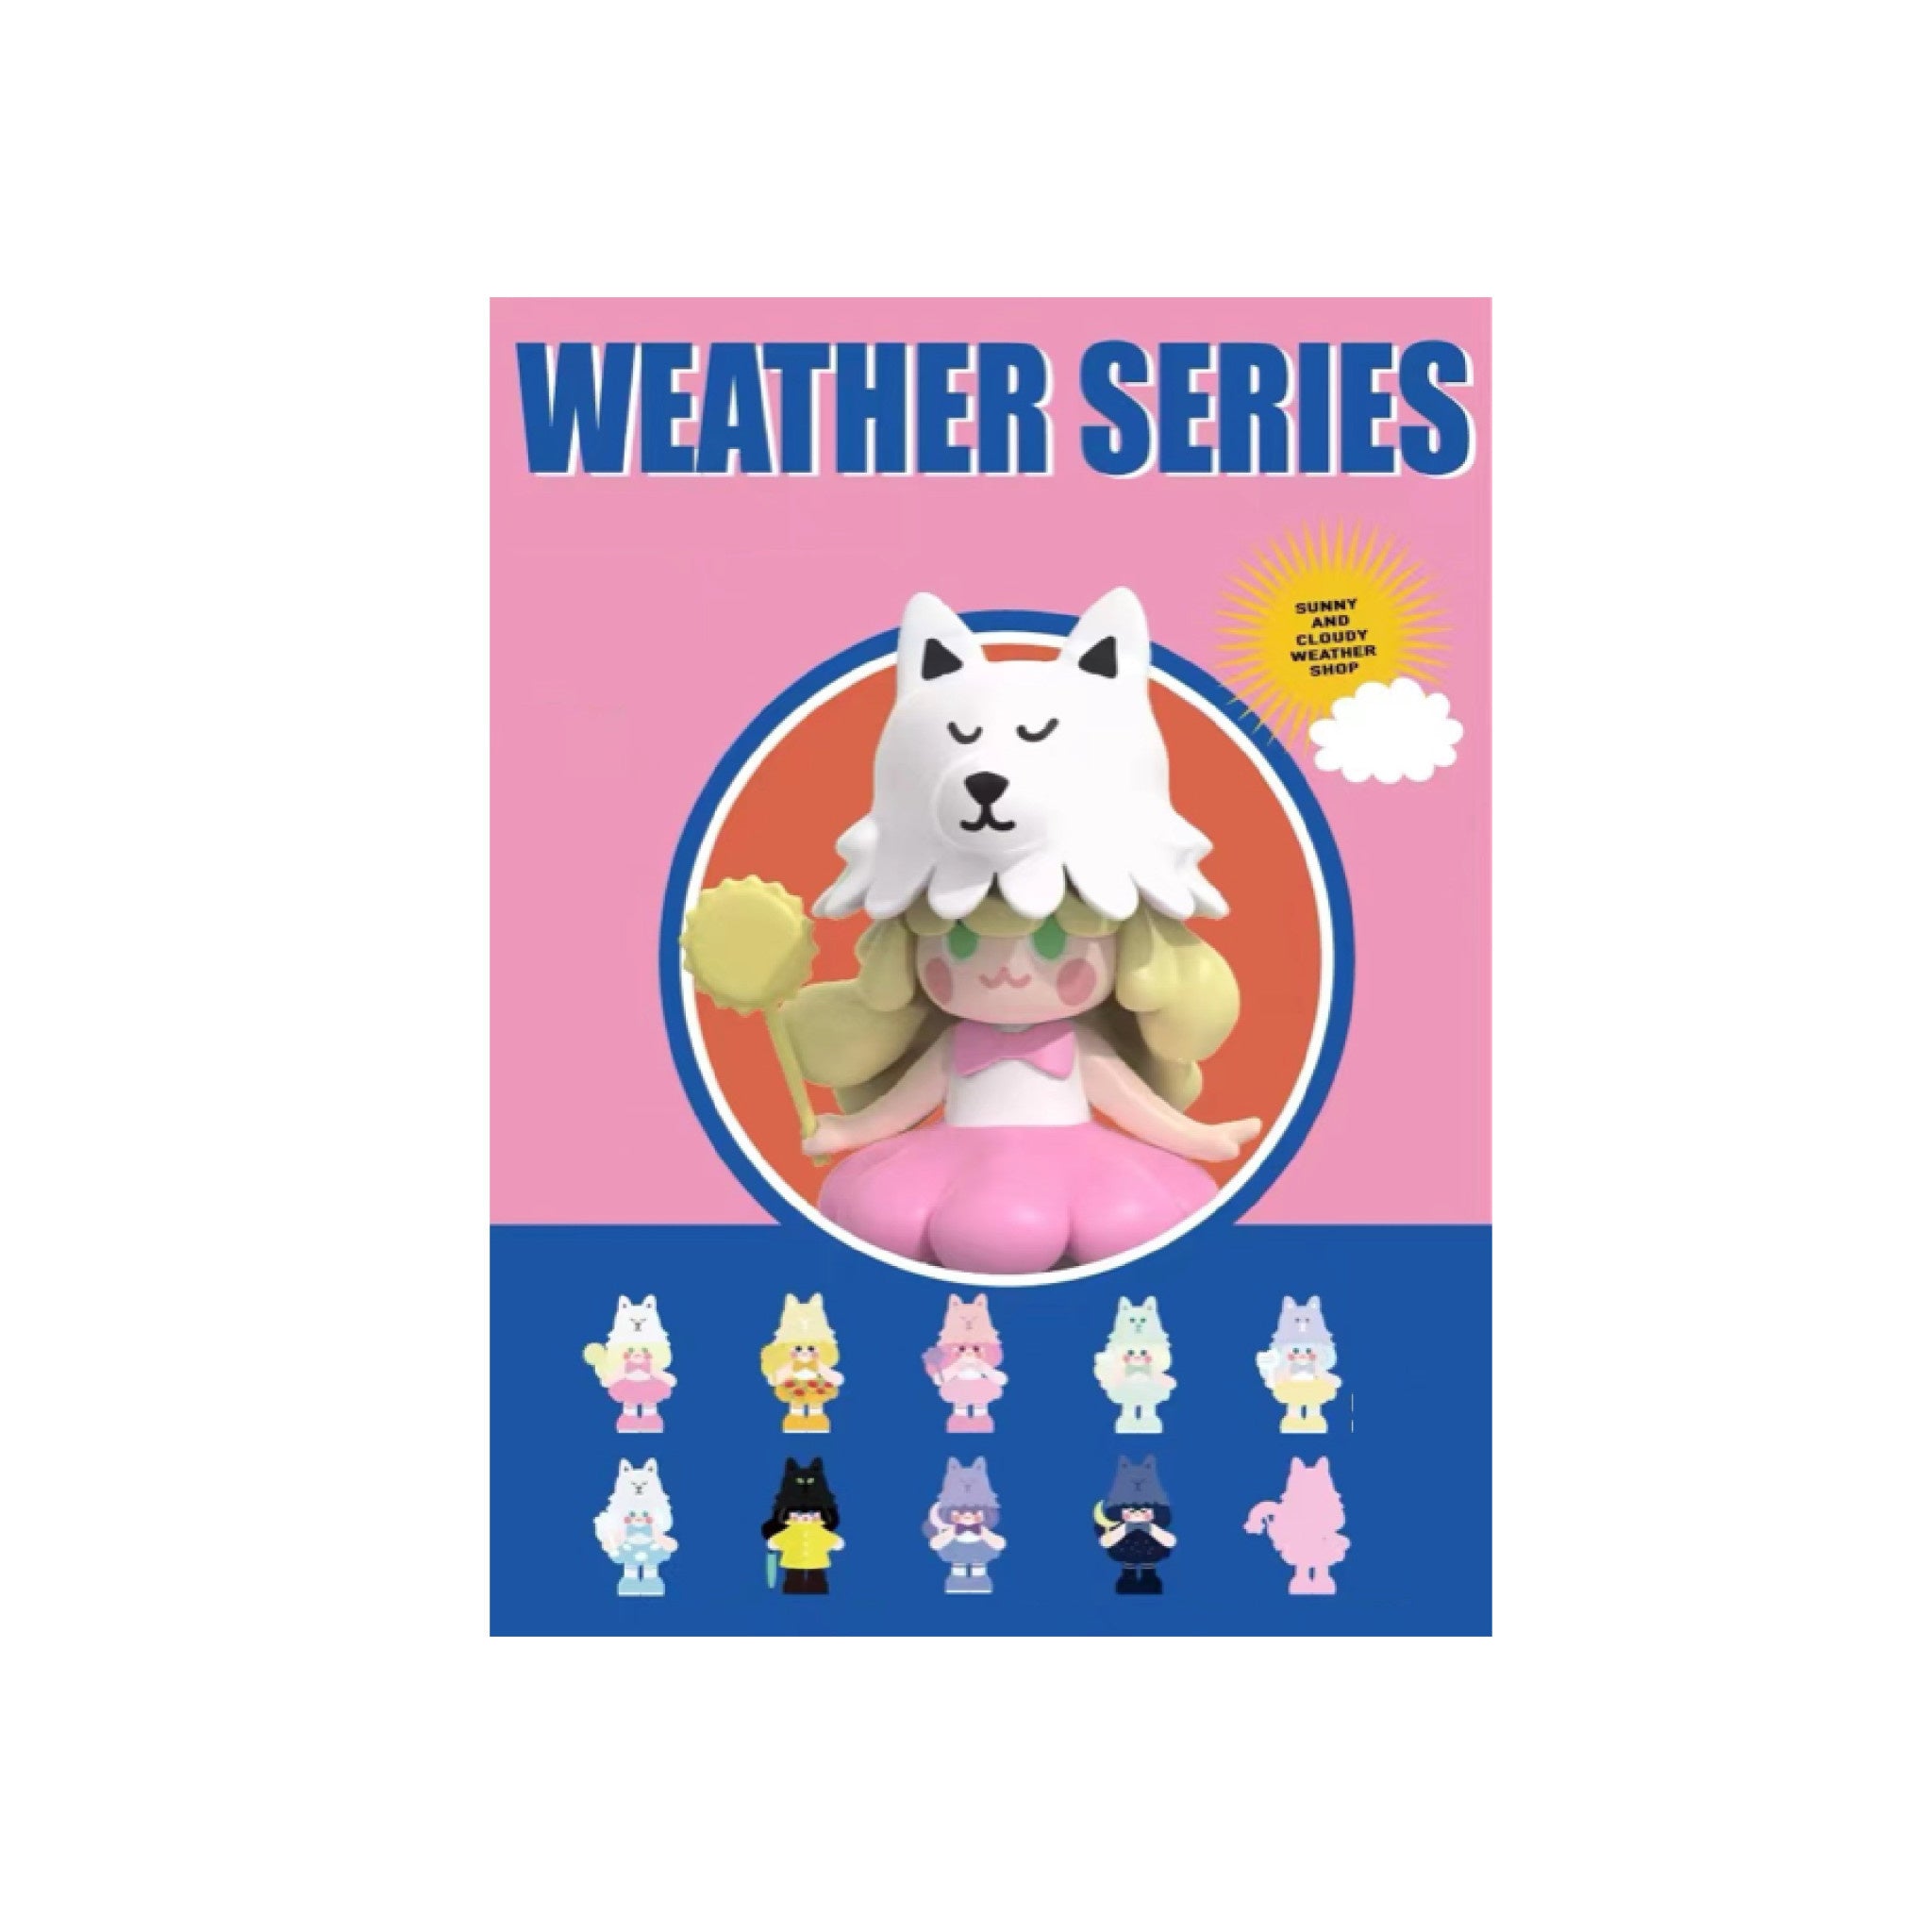 Skoll Sunny and Cloudy Weather Shop Blind Boxes - Wynwood Walls Shop